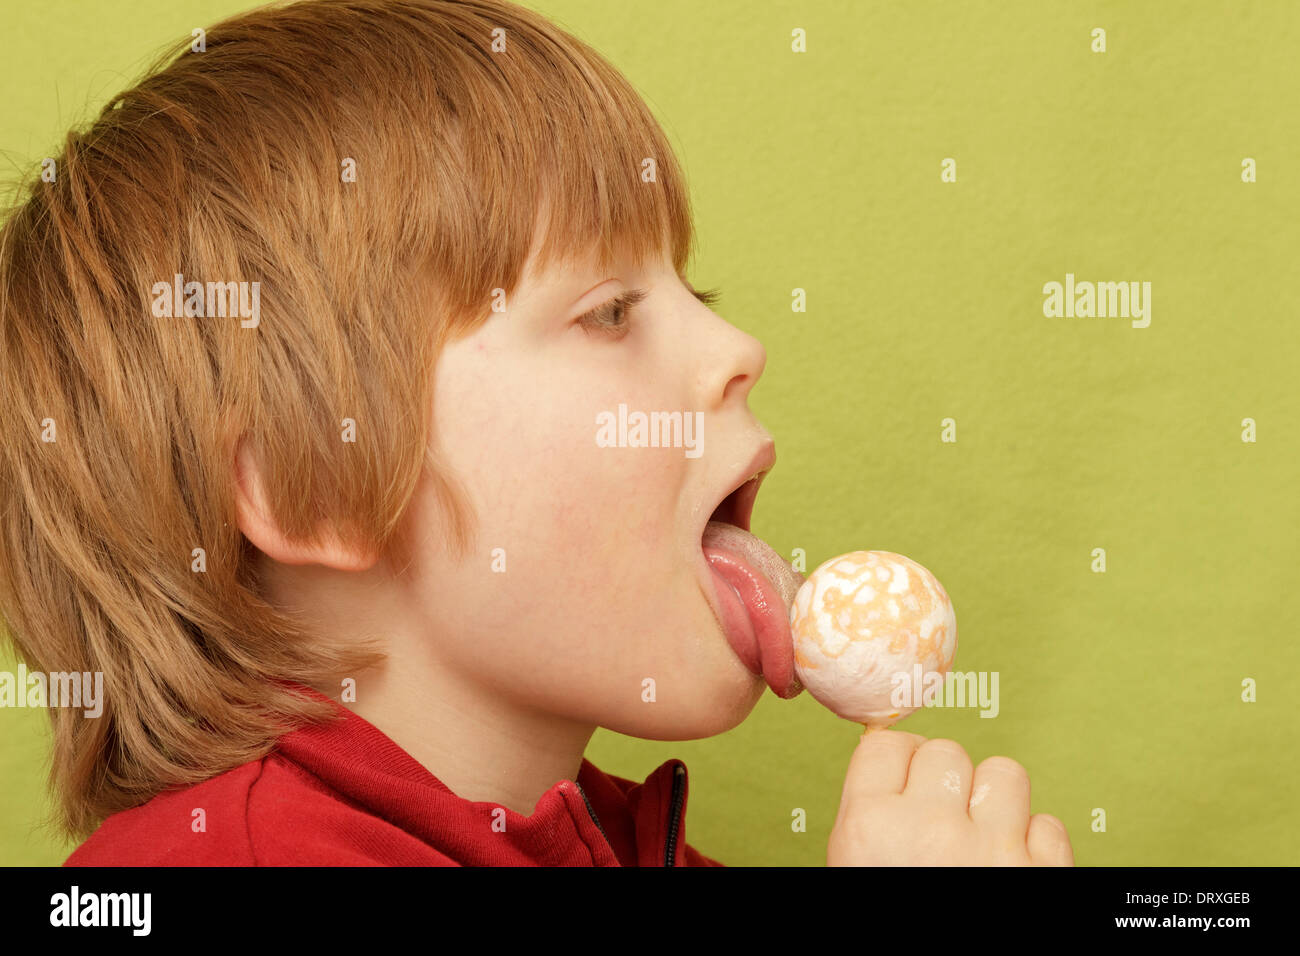 portrait of a happy young boy licking a lolly Stock Photo